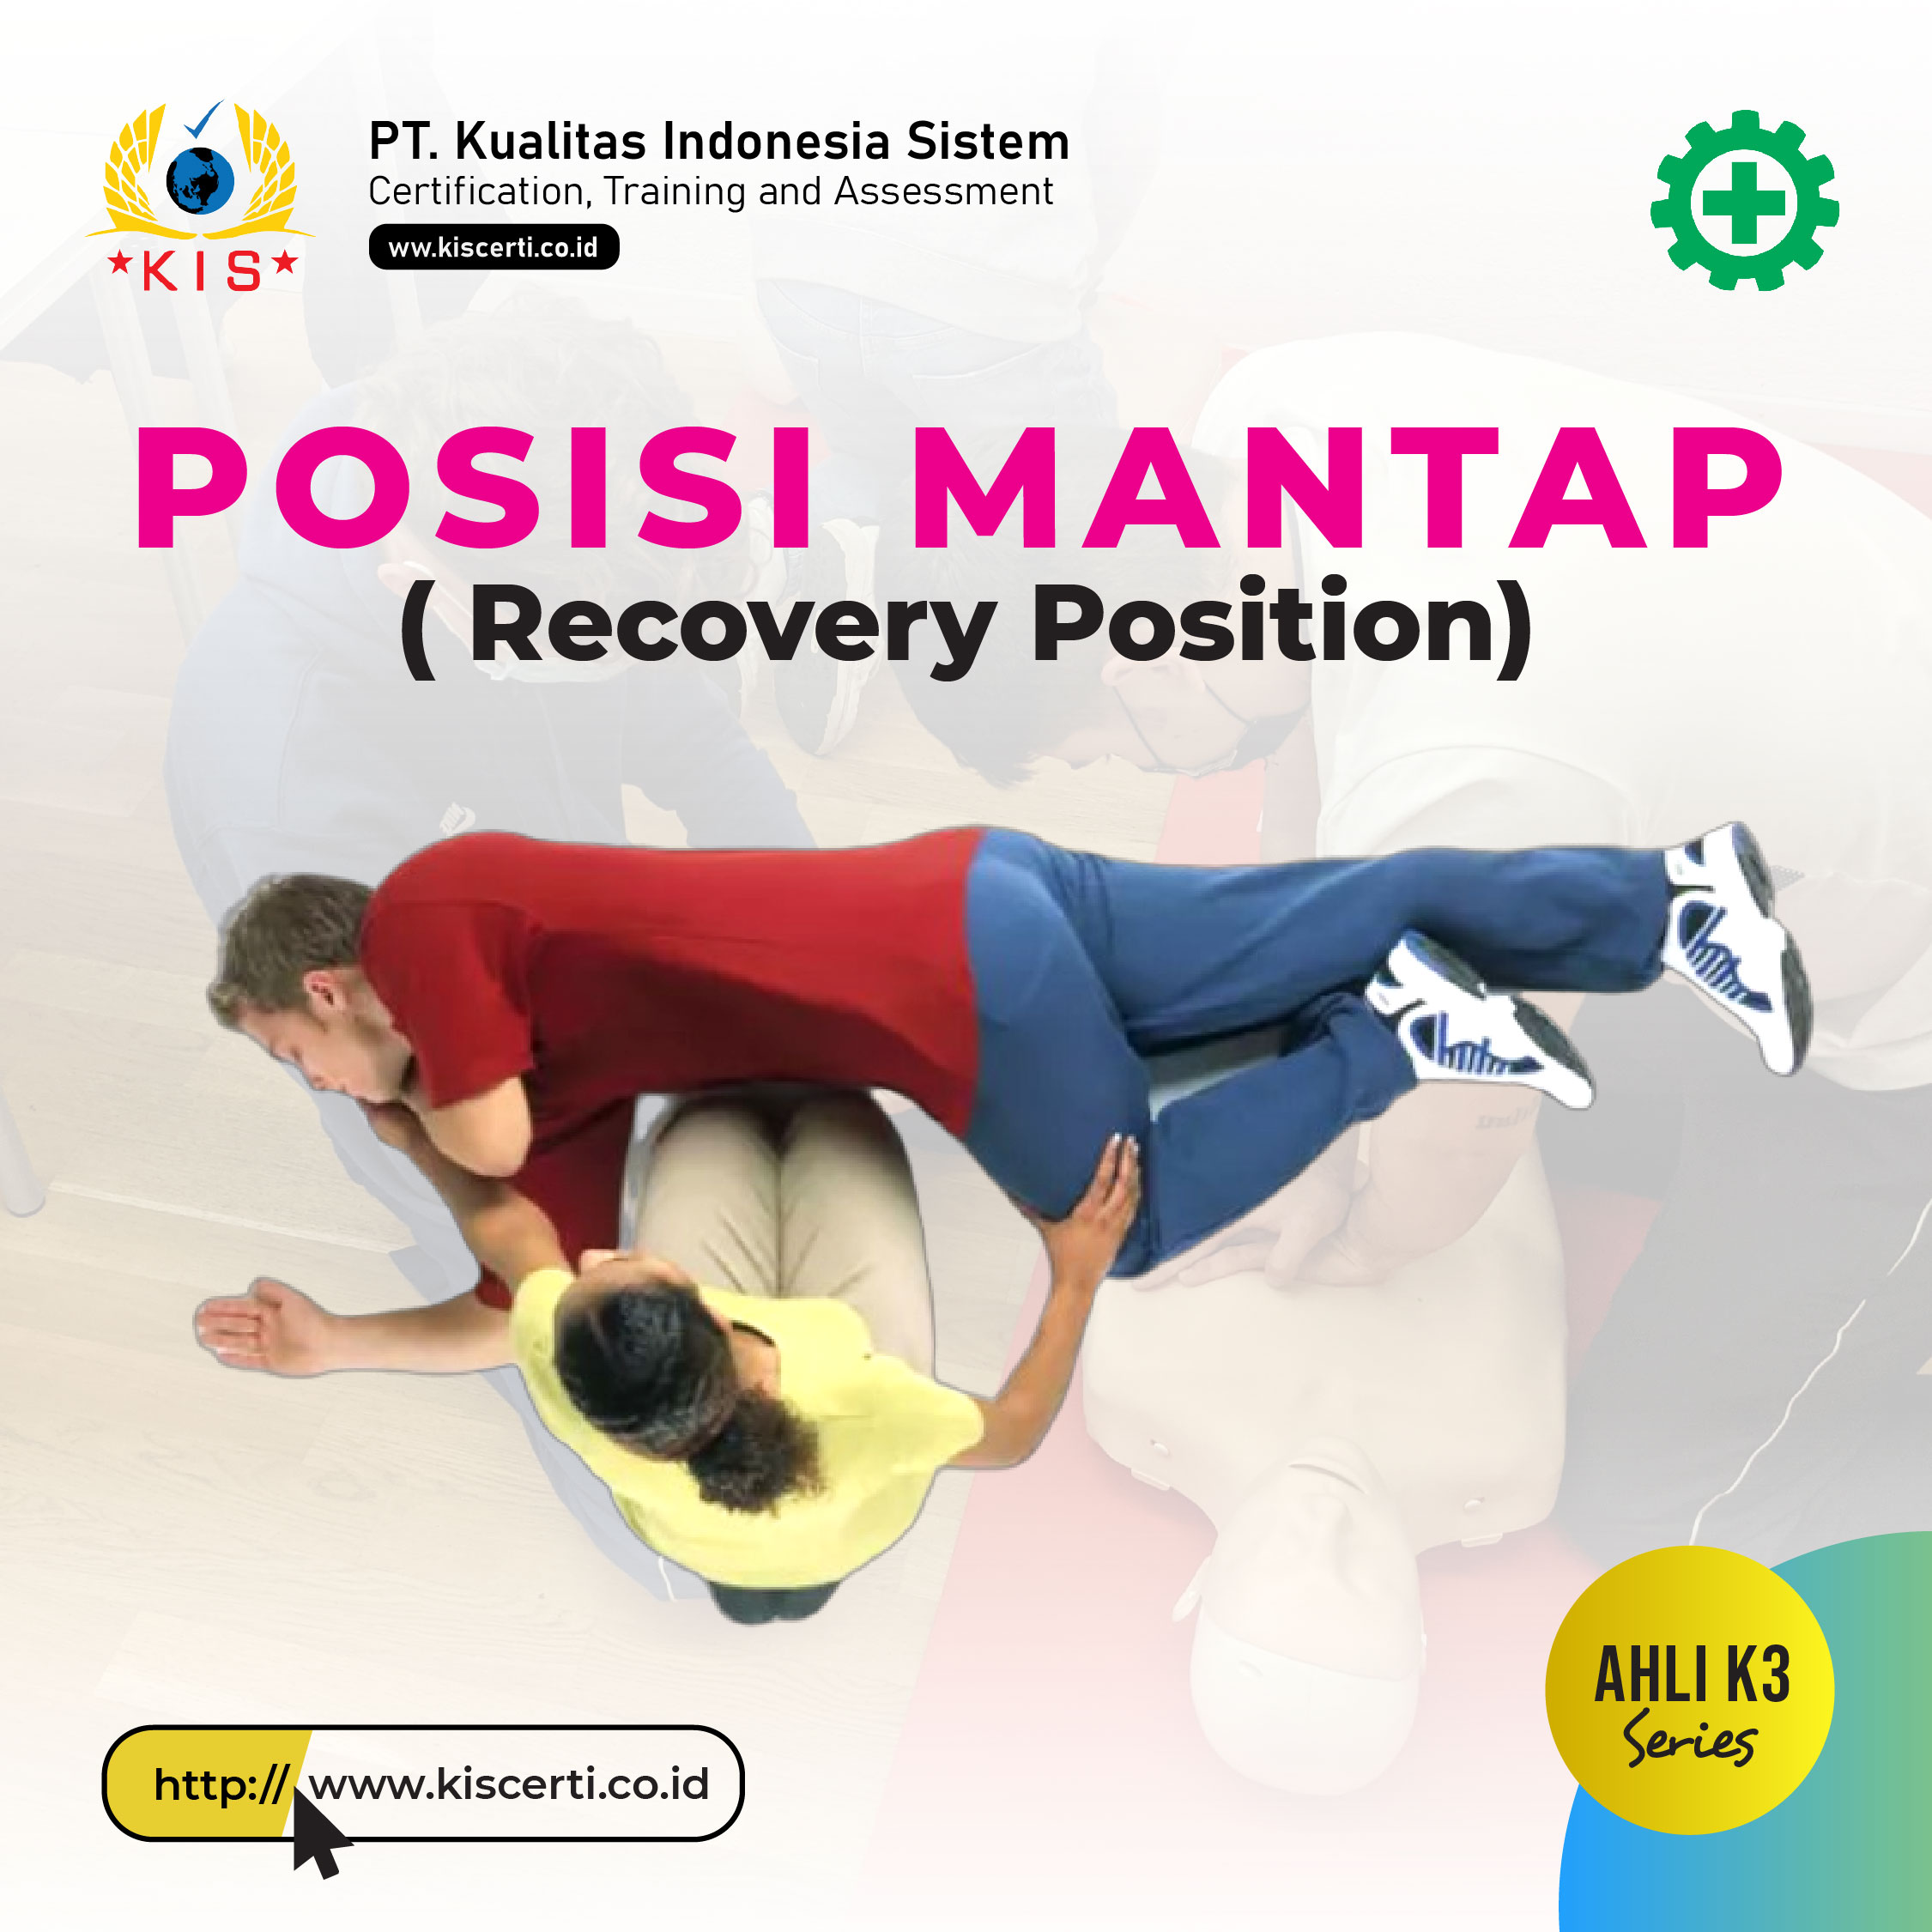 Posisi Mantab - Recovery Position